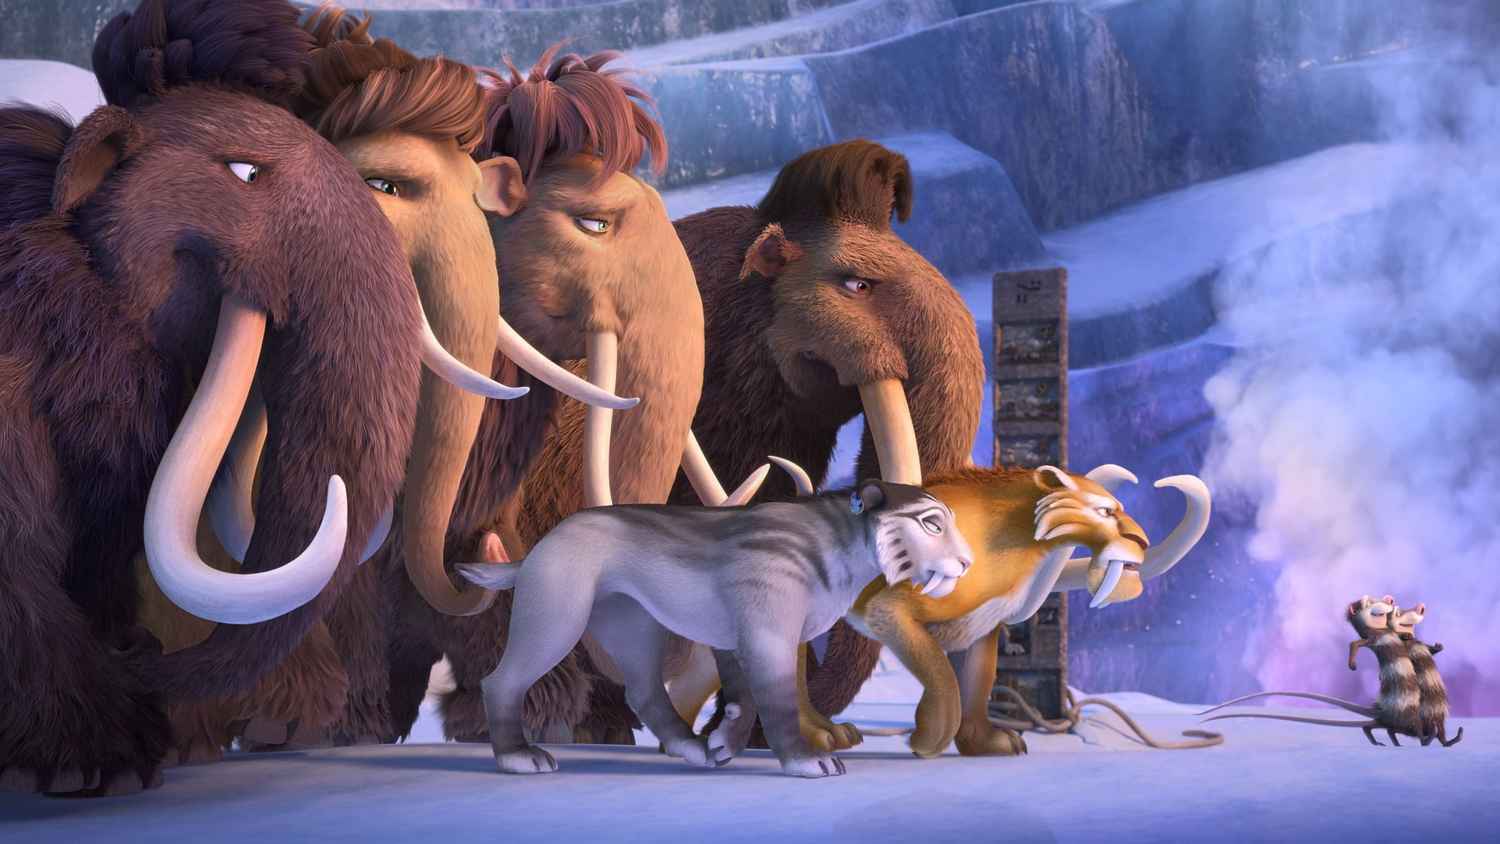 ice age 5 in hindi full movie free download